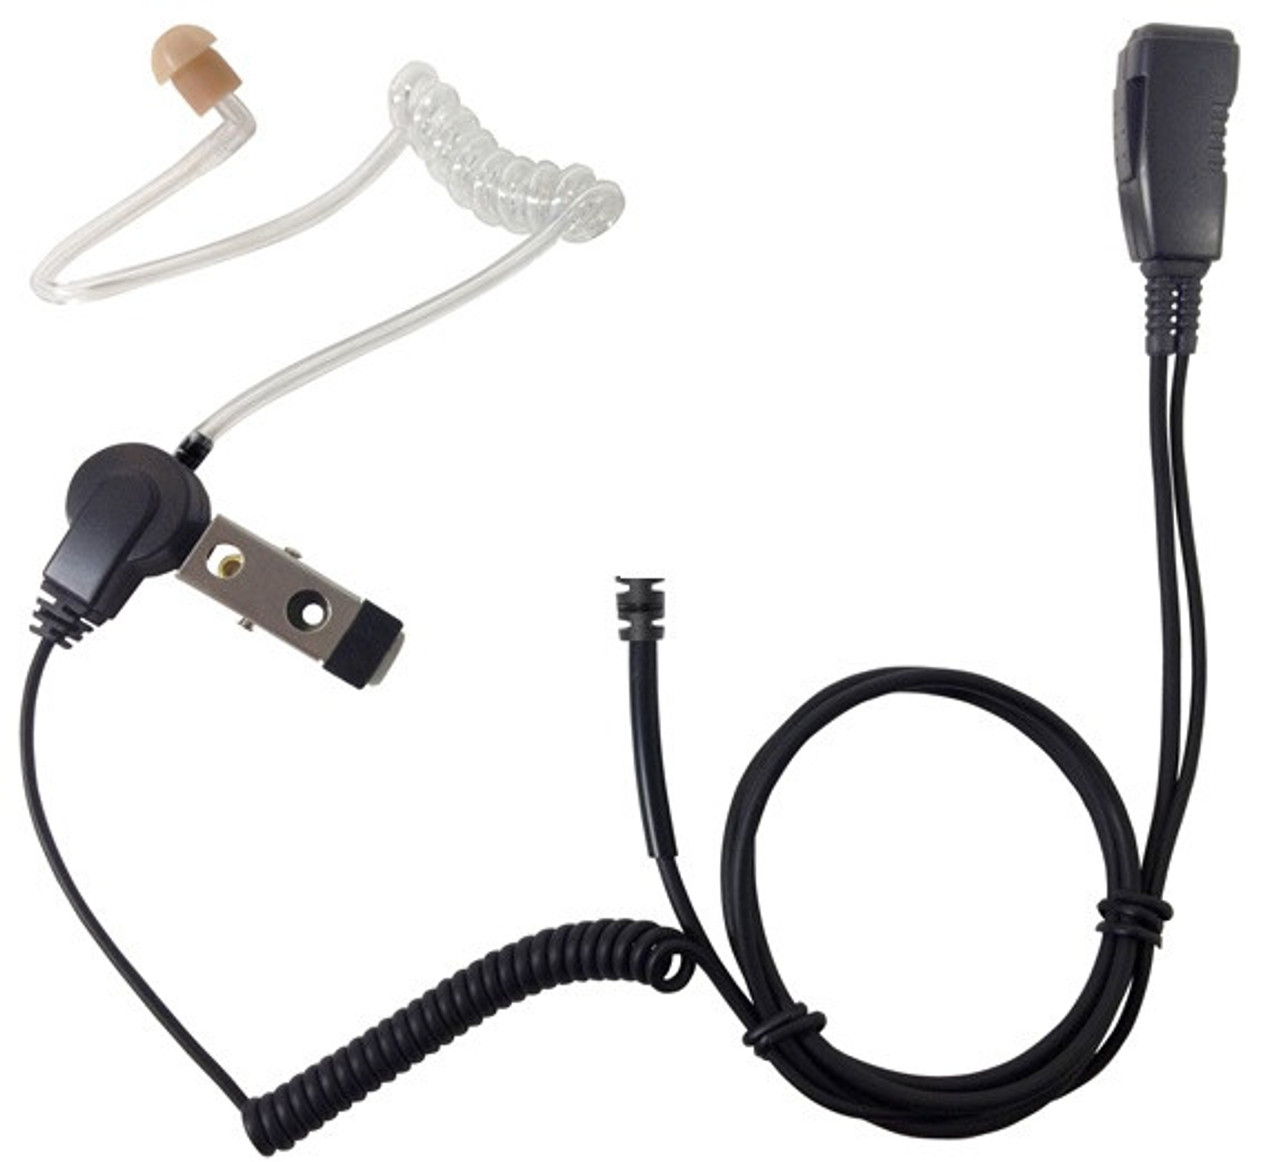 National 2 Way AT1W-H4 Surveillance Earpiece with In-Line Push to Talk Mic for Hytera Two Way Radios with 2 Pin Audio Accessory Ports